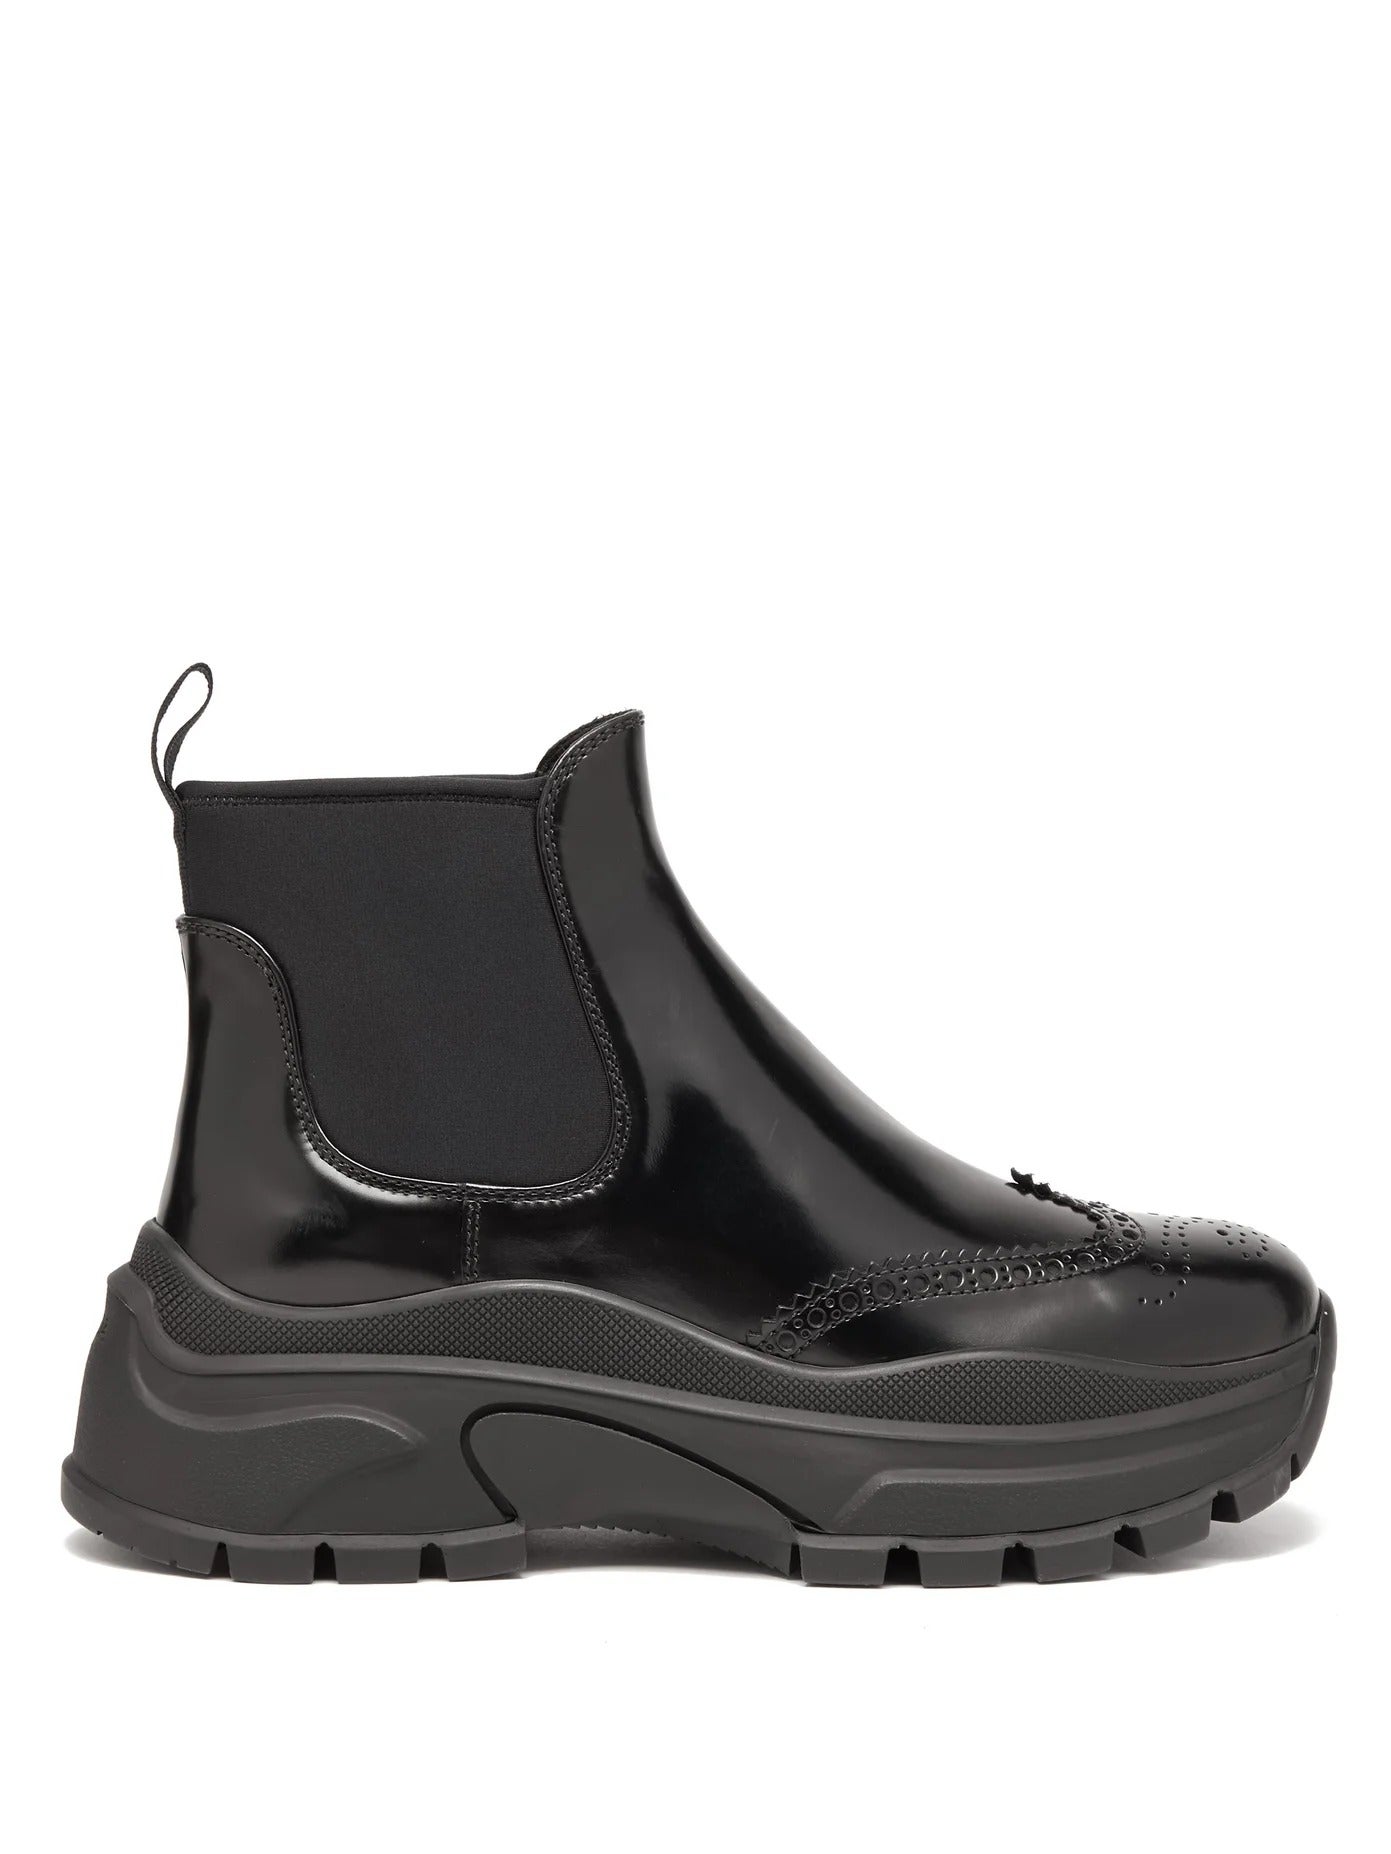 Prada + Chunky-Sole Patent-Leather Ankle Boots